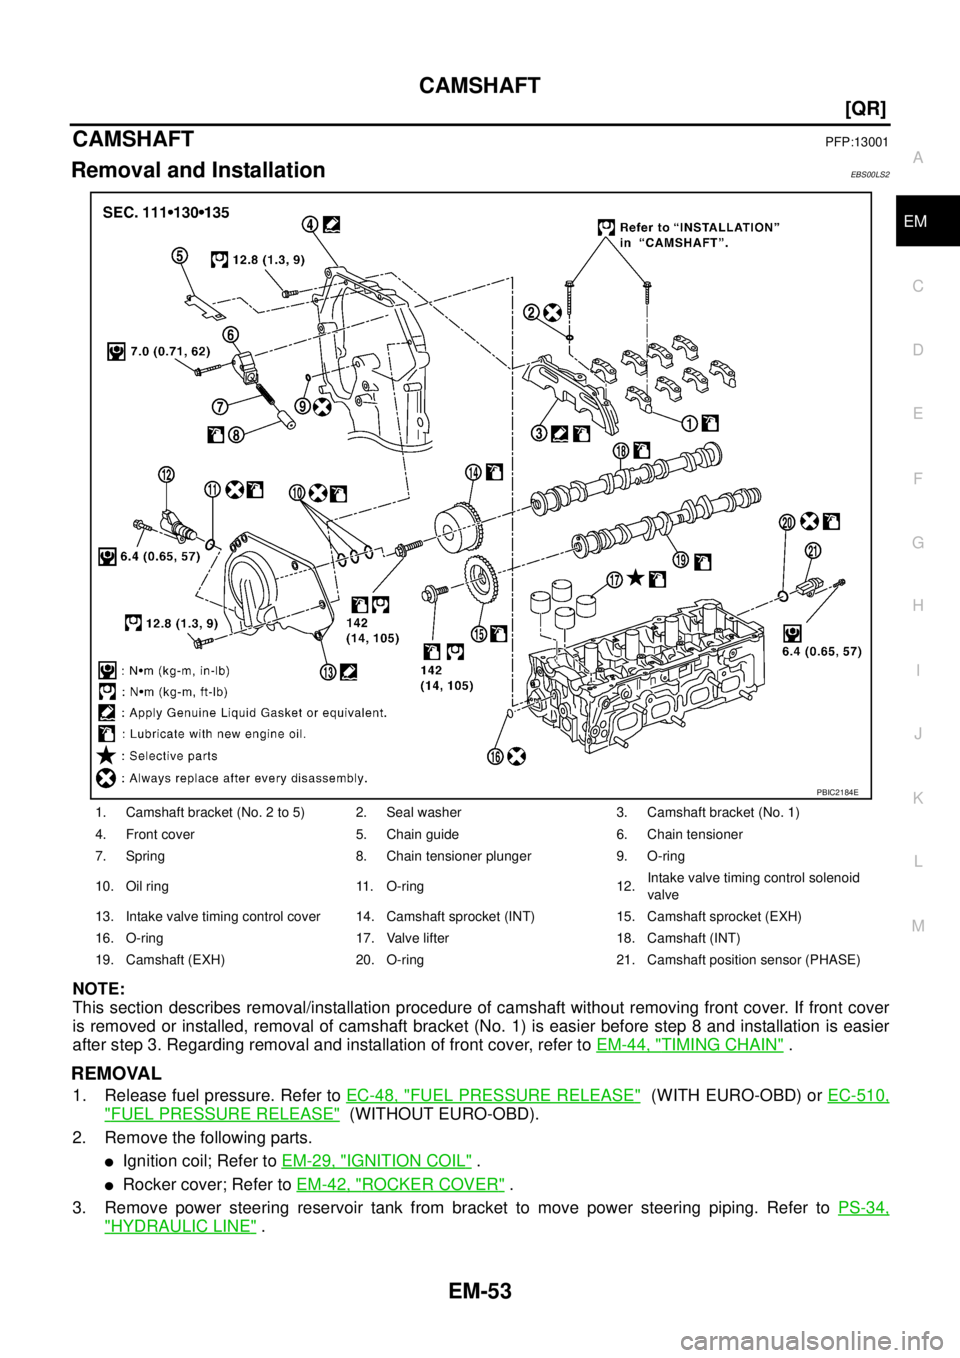 NISSAN X-TRAIL 2003  Service User Guide CAMSHAFT
EM-53
[QR]
C
D
E
F
G
H
I
J
K
L
MA
EM
 
CAMSHAFTPFP:13001
Removal and InstallationEBS00LS2
NOTE:
This section describes removal/installation procedure of camshaft without removing front cover.